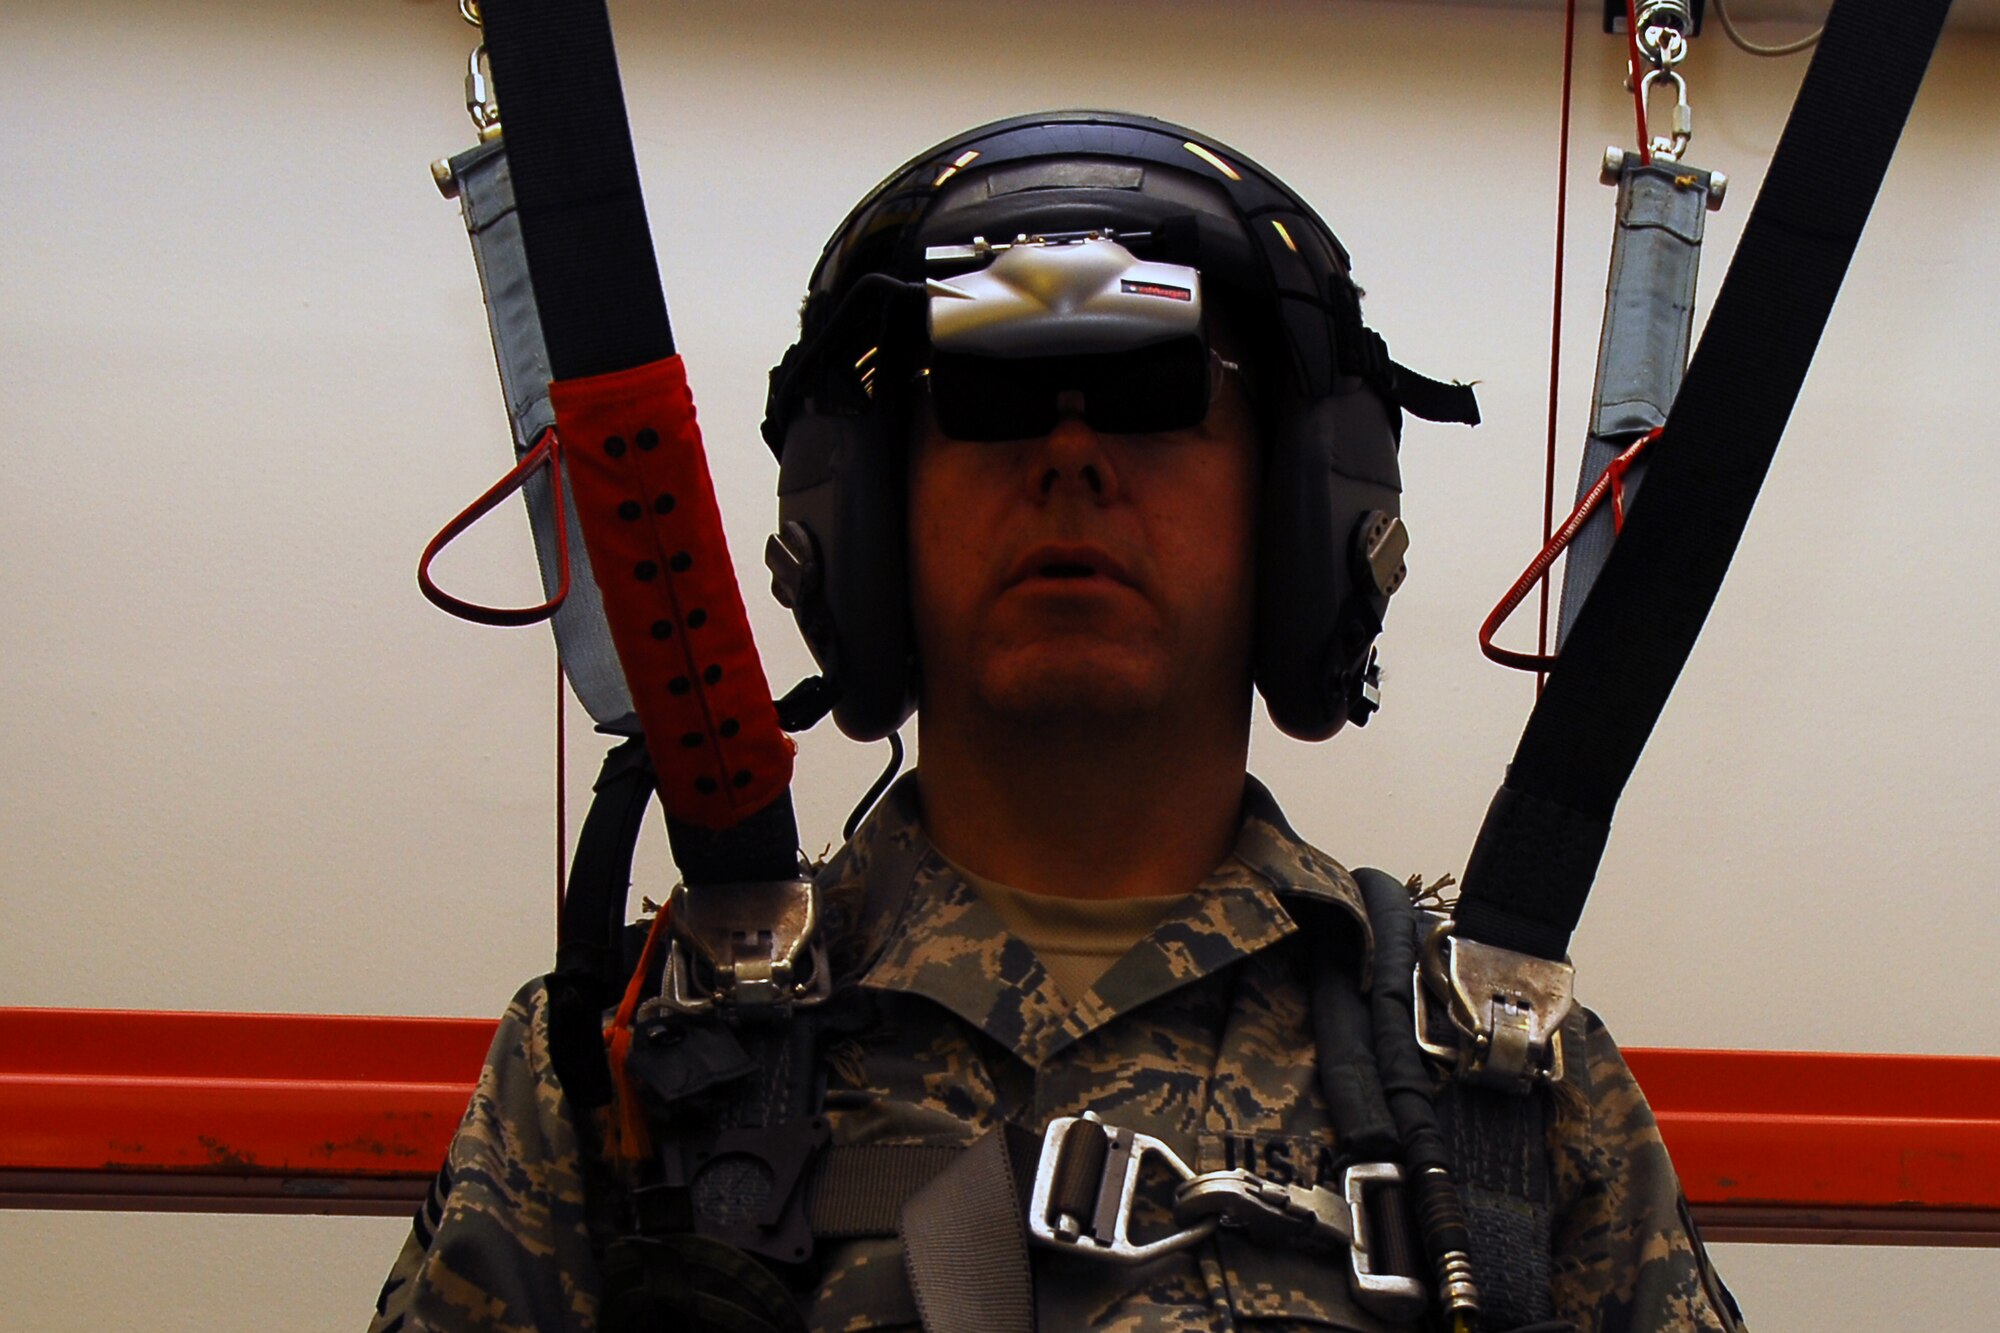 Chief Master Sergeant Steven Larwood, 22nd Air Force command chief, looks into his virtual helmet to locate his landing target while strapped into the 403rds Aircrew Flight Equipment's parachute simulator. This is one of the many shops the chief visited upon his visit to the 403rd Wing. (U.S. Air Force Photo by Senior Airman Tabitha Dupas)